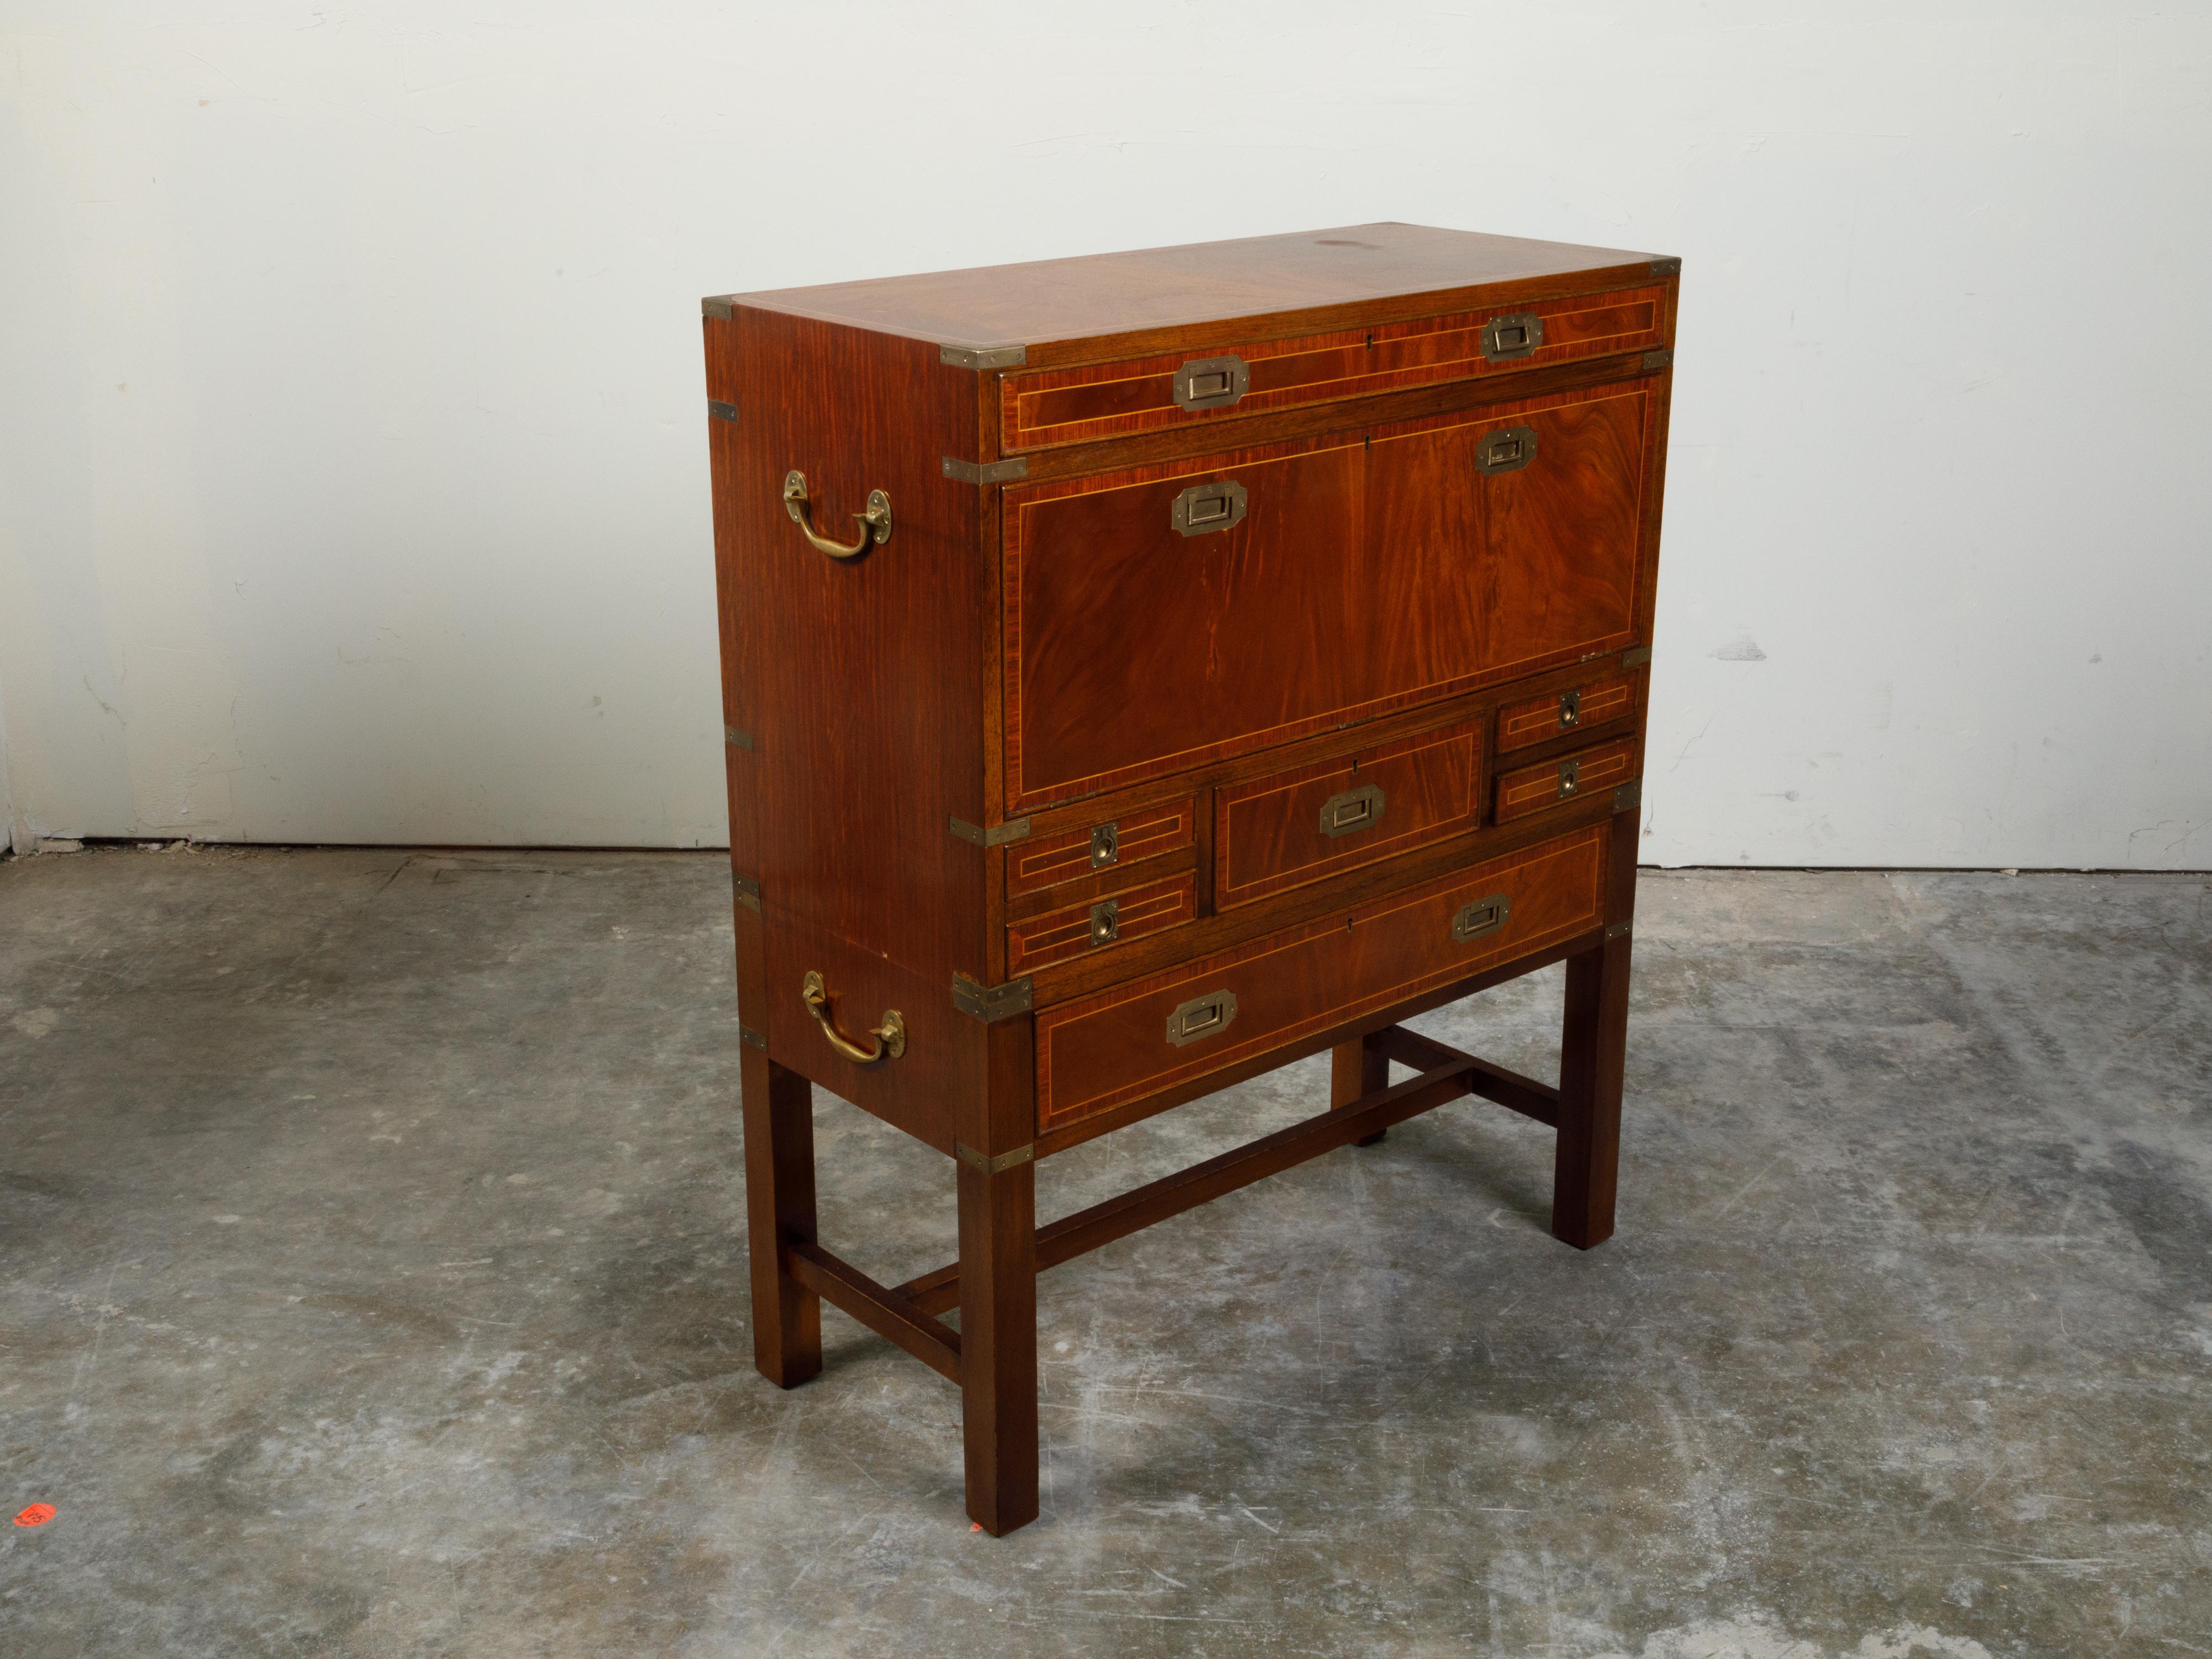 An English Campaign mahogany drop-front desk from the 19th century, with brass hardware. Created in England during the 19th century, this desk features a rectangular top sitting above a perfectly organized façade. A narrow drawer with banding at the